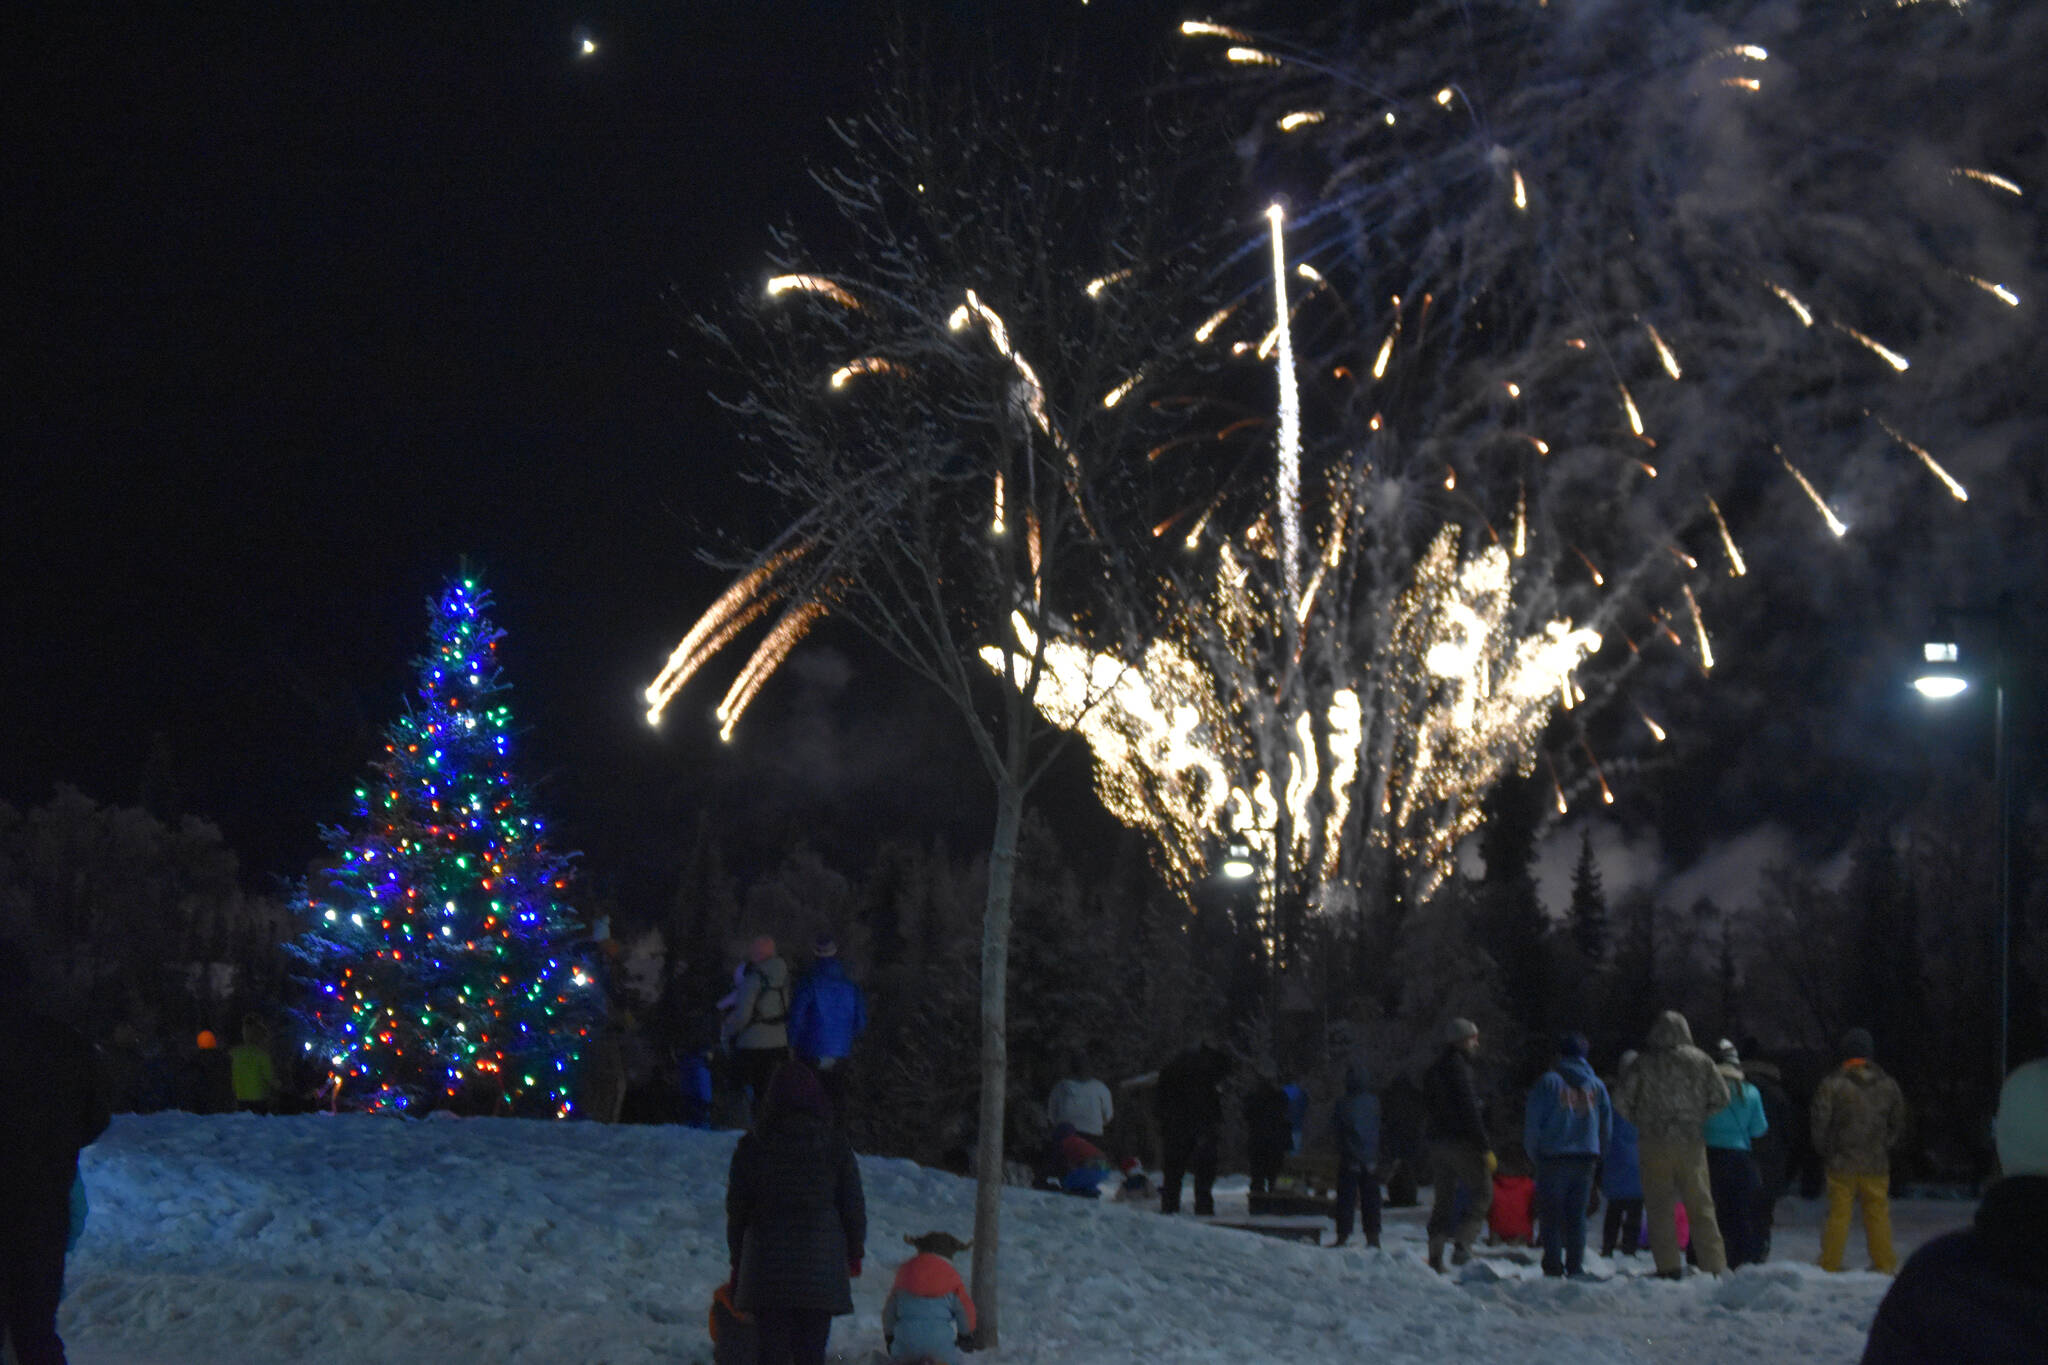 Fireworks explode before a crowd of attendees at Christmas in the Park on Saturday, Dec. 3, 2022, in Soldotna, Alaska. (Jake Dye/Peninsula Clarion)